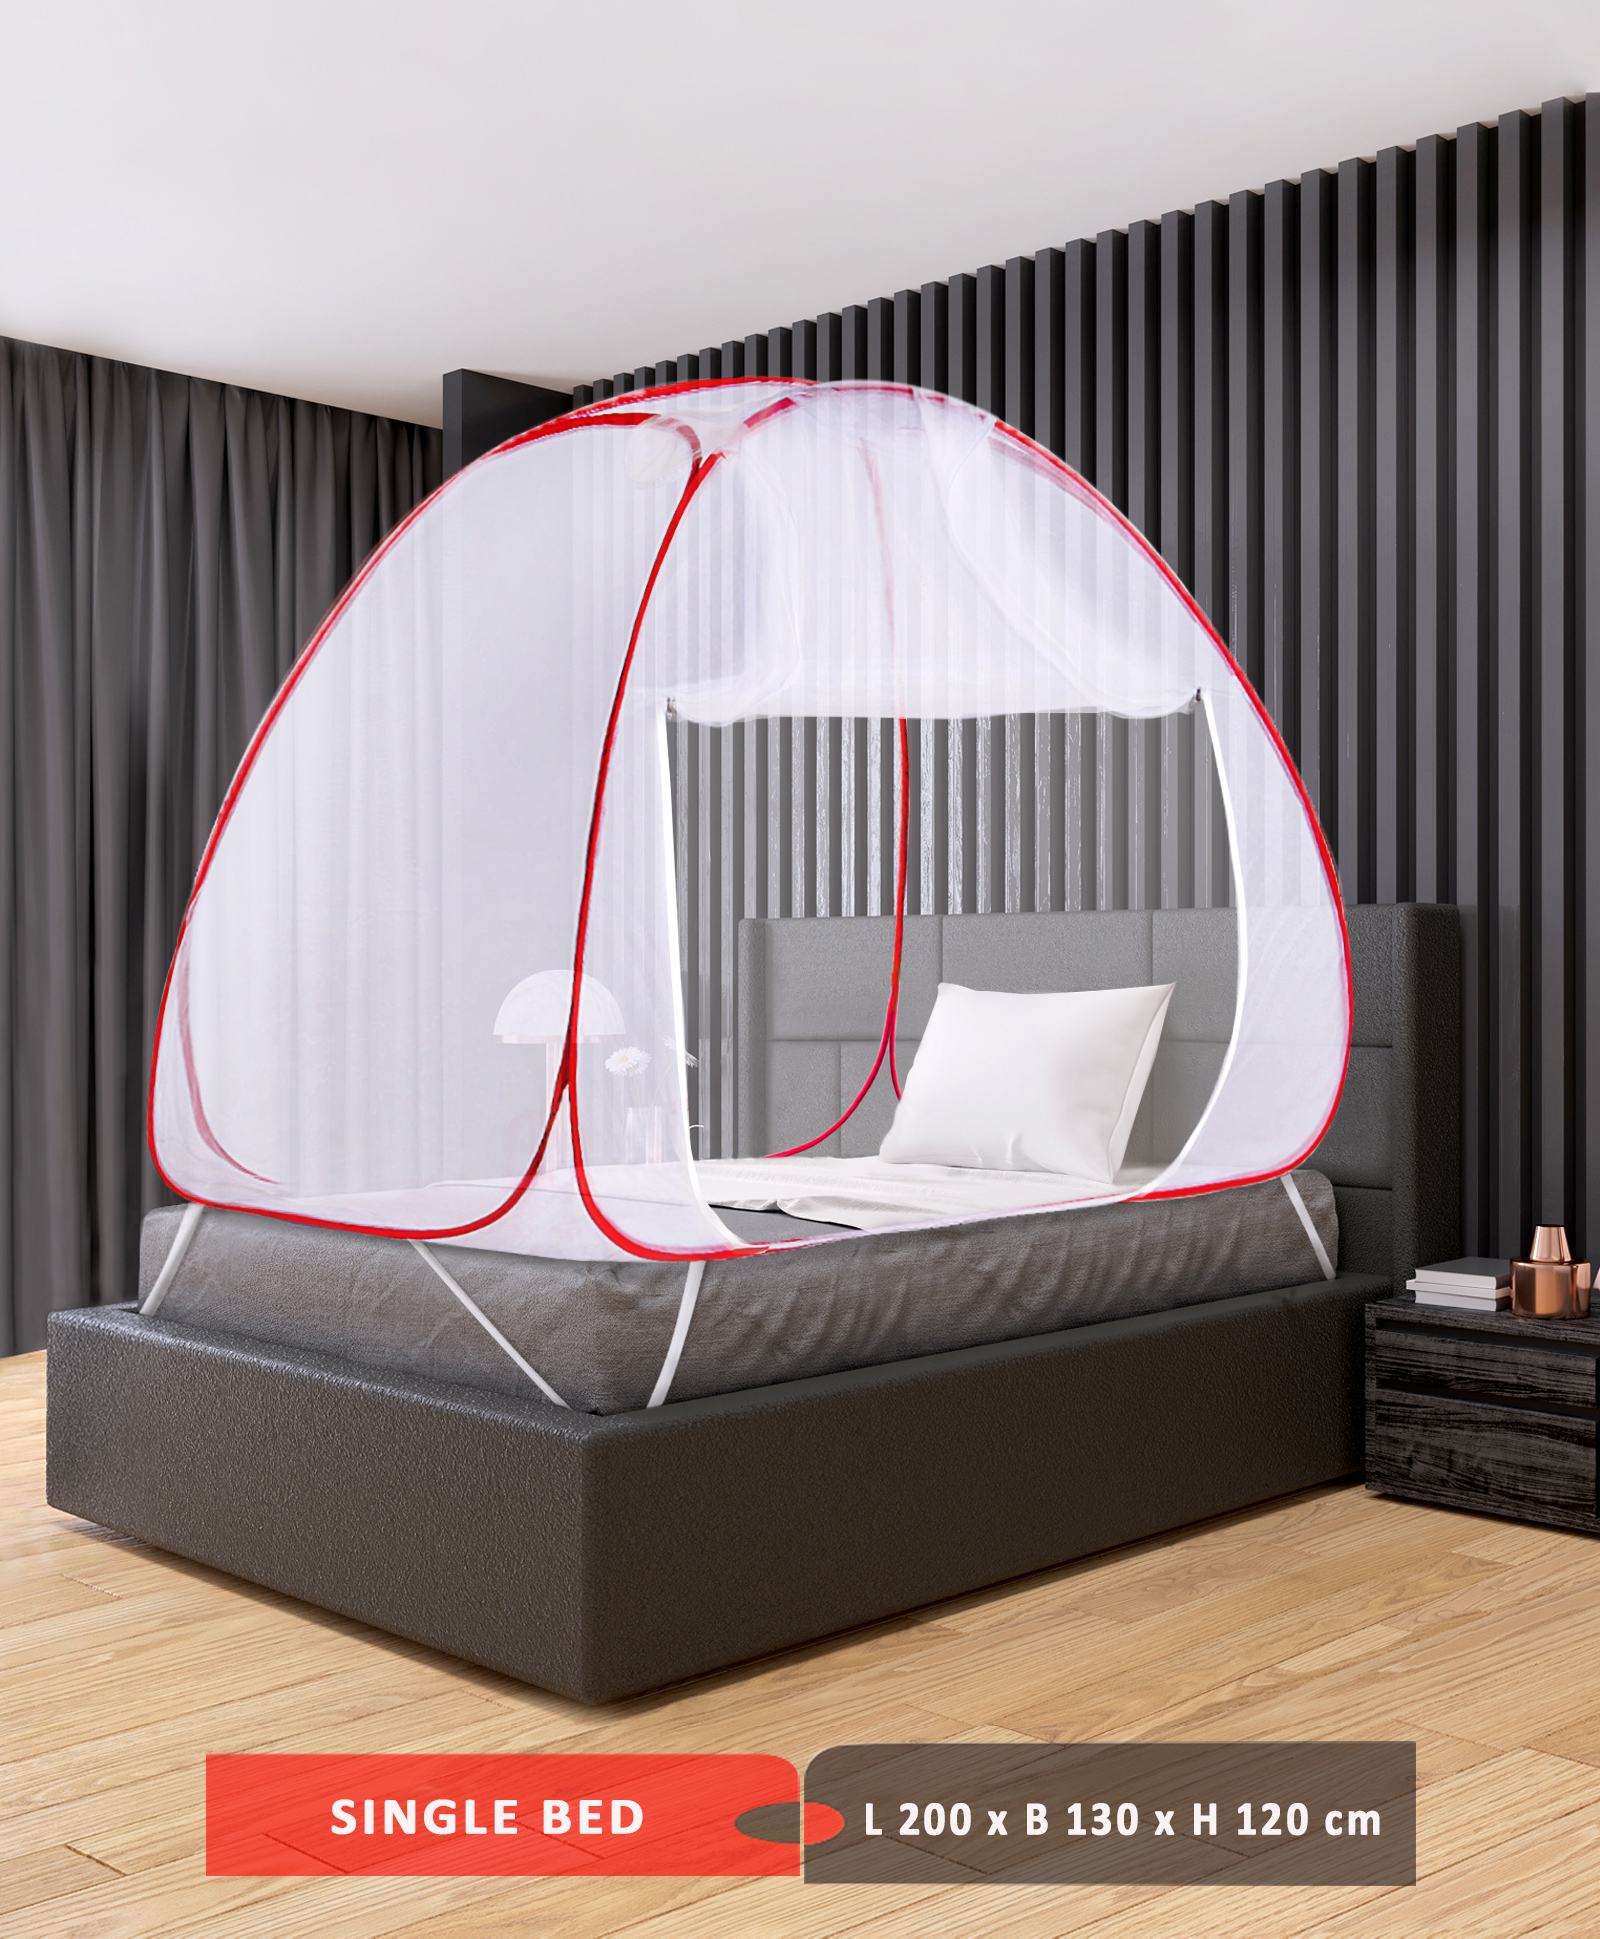 Mosquito Nets 4 U LARGE MOSQUITO NET Bed Canopy Maximum Insect Net Protection No Skin Irritation Deet Free Natural Repellent 